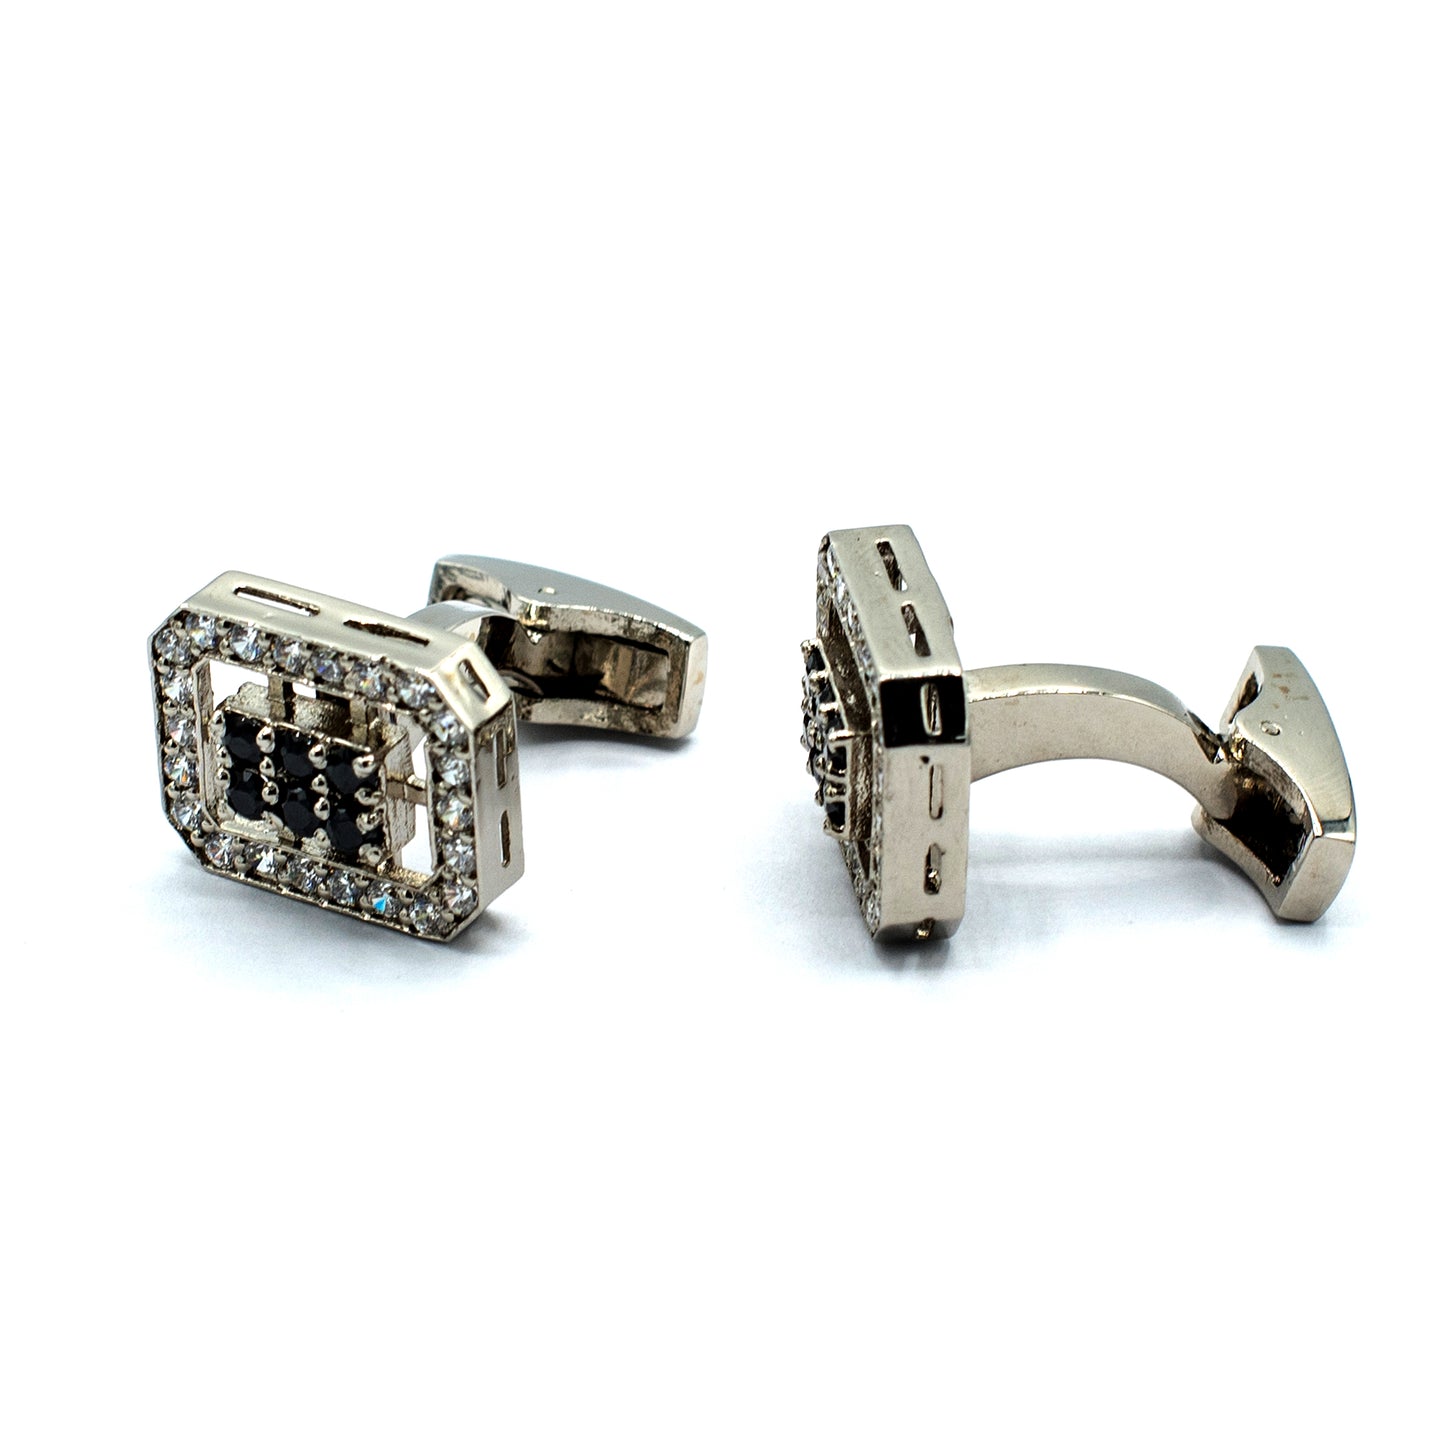 Cufflinks for Men Exclusive Men's Fashion Cufflinks Set With Synthetic Black Garnet For All Occasions